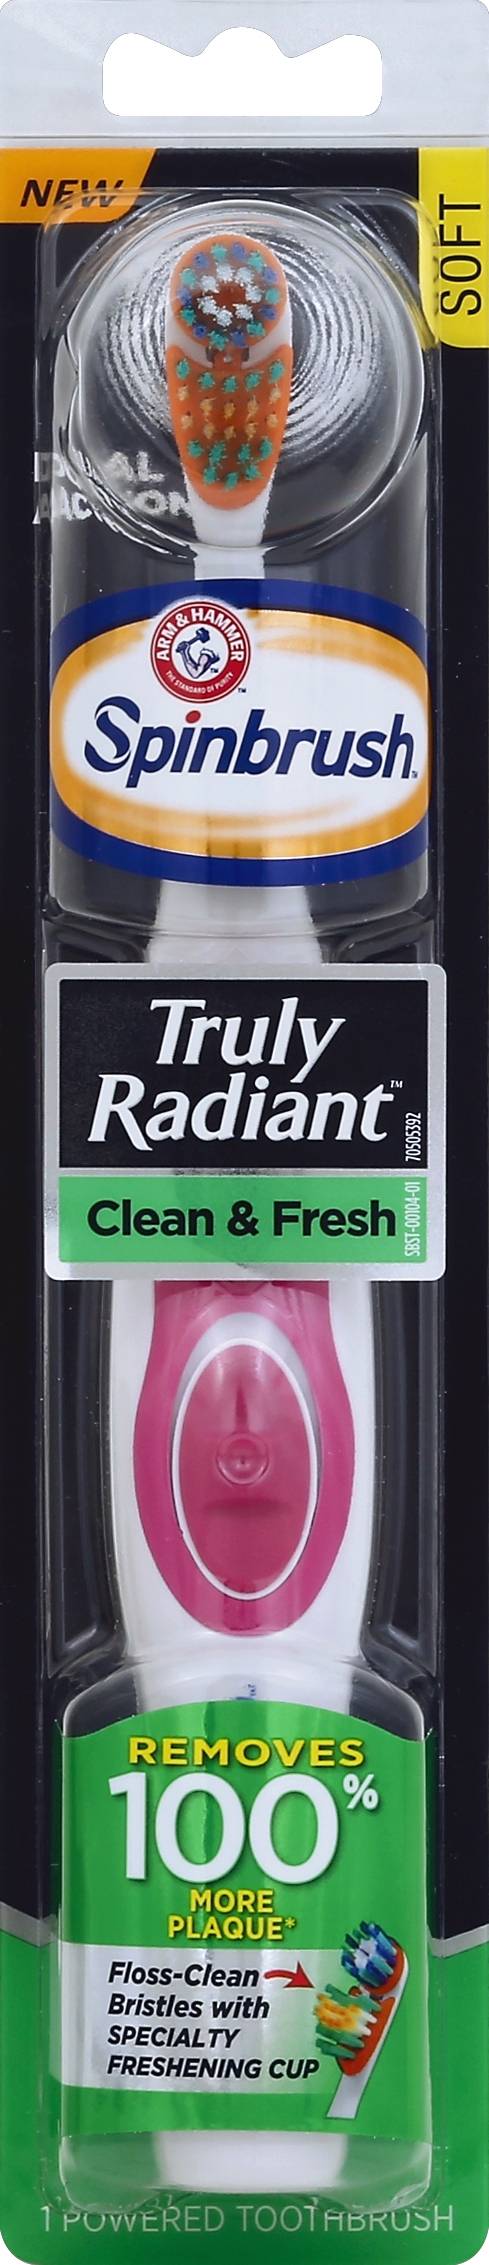 Arm & Hammer Spinbrush Truly Radiant Clean & Fresh Toothbrush